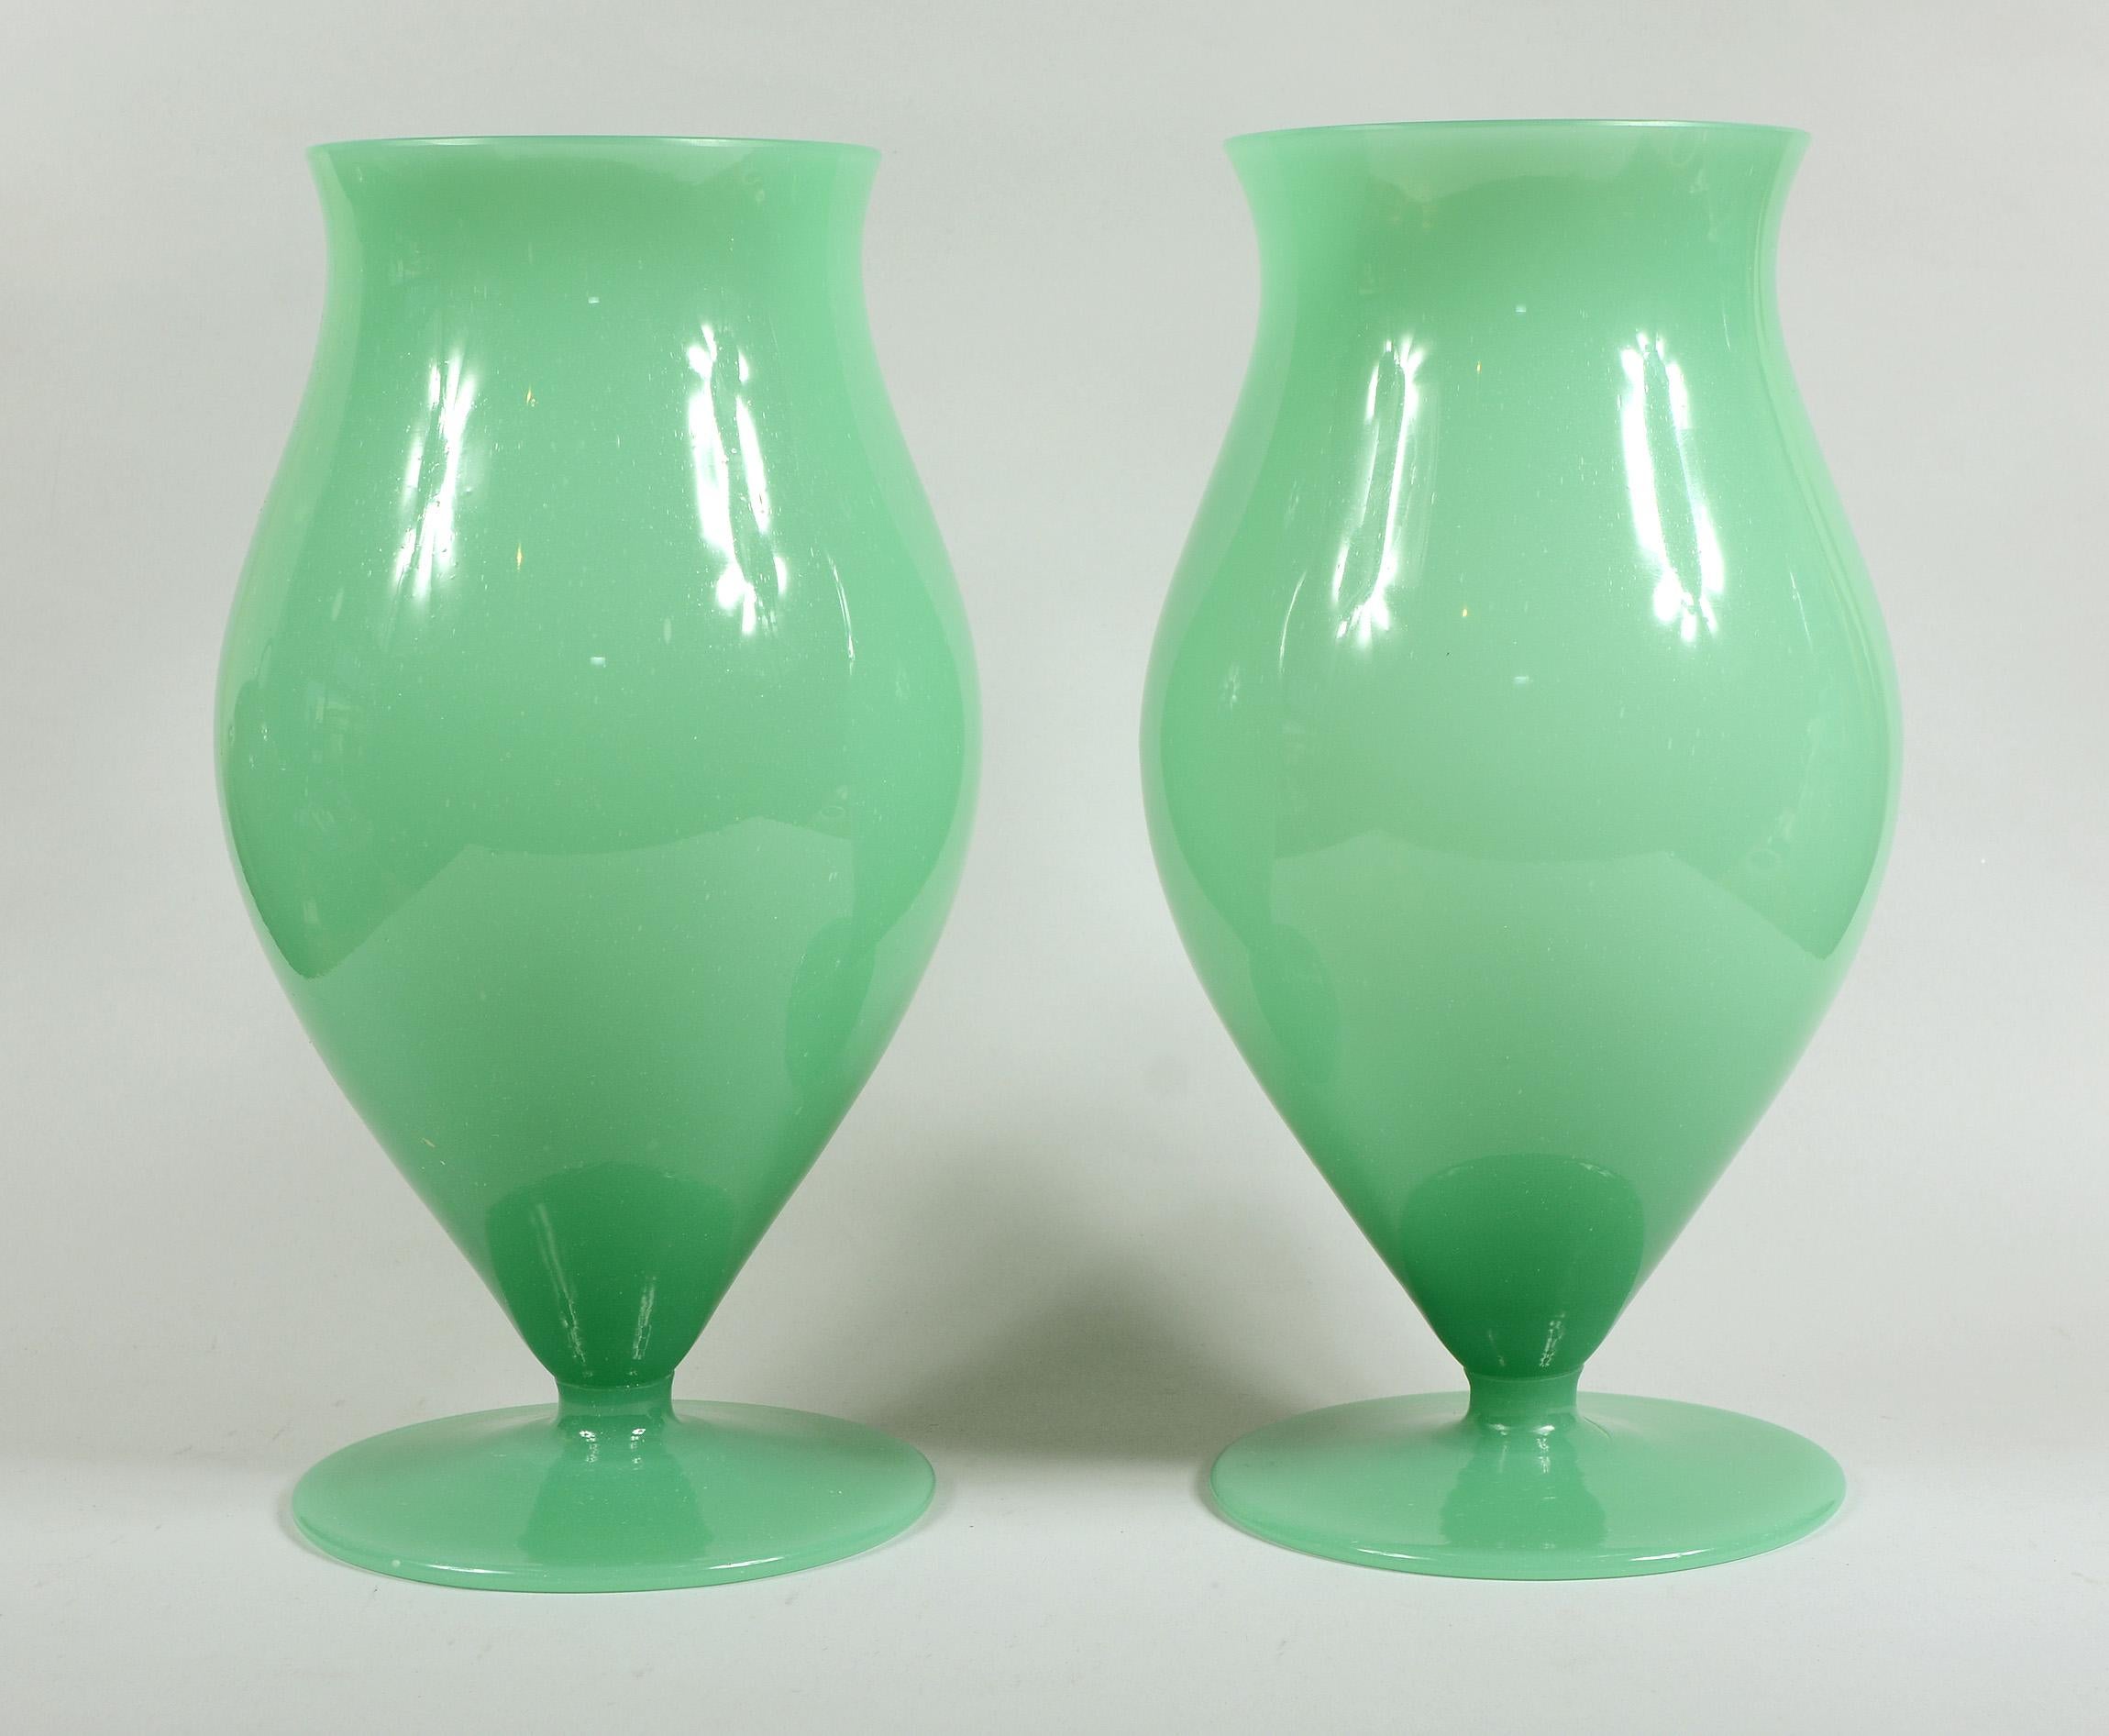 Pair of Murano urn shaped glass vases. These are a green opaque foamy glass.